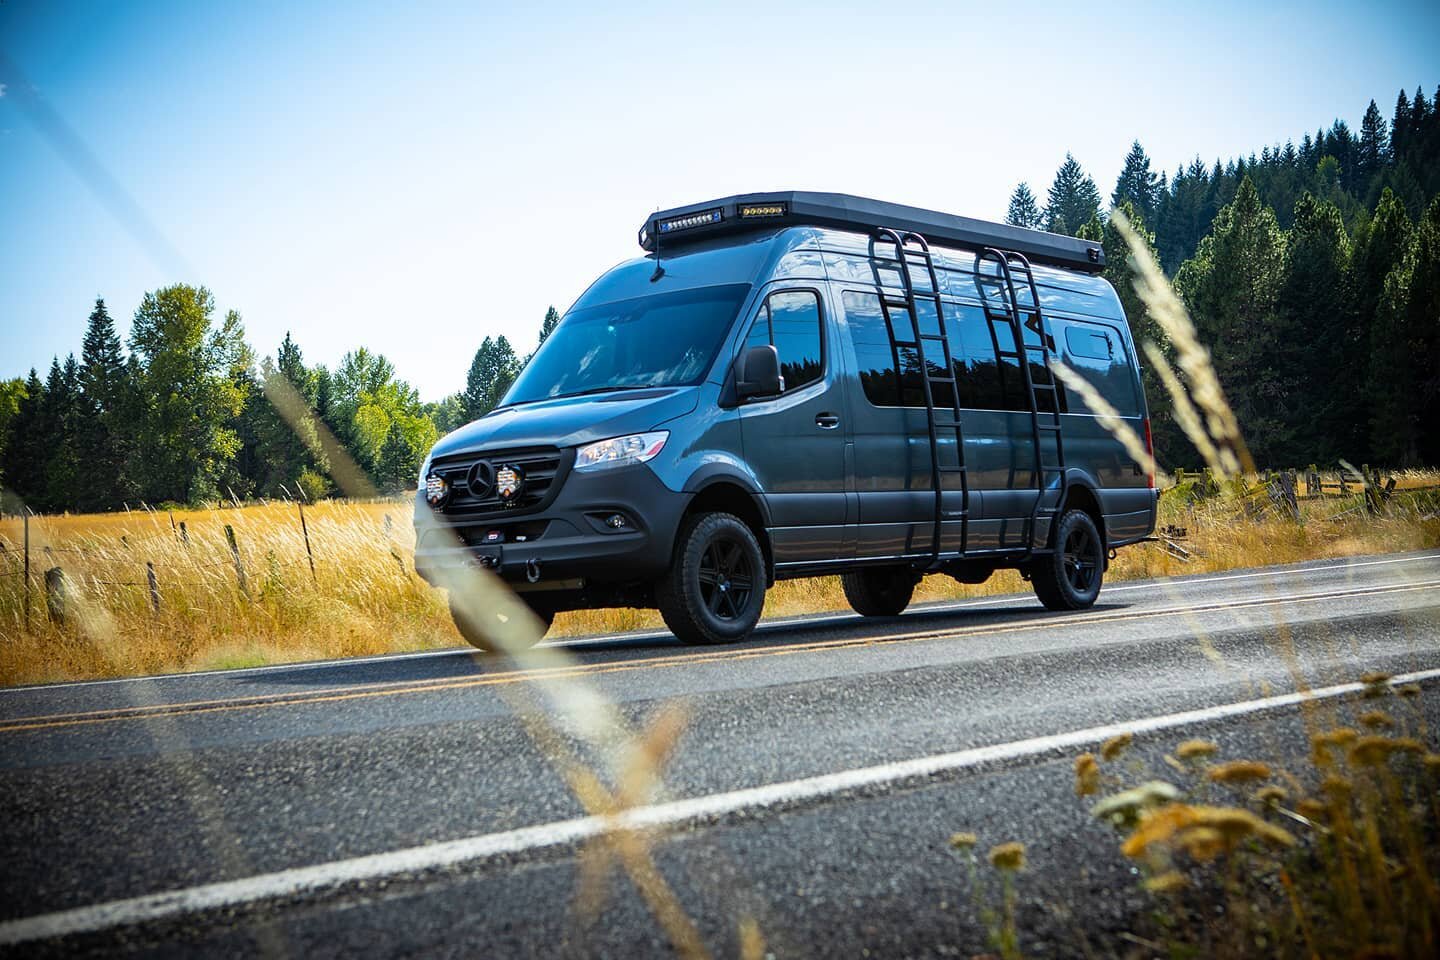 Our latest van &quot;Blue&quot; is ready for adventure! Go check it out on our site, link in profile.
.
.
.
#vanlife #adventurevan #adventurevehicle #vanlifeculture #vanlifecommunity #sprintervan #sprintercampervans #sprinterconversion #4x4sprinter #